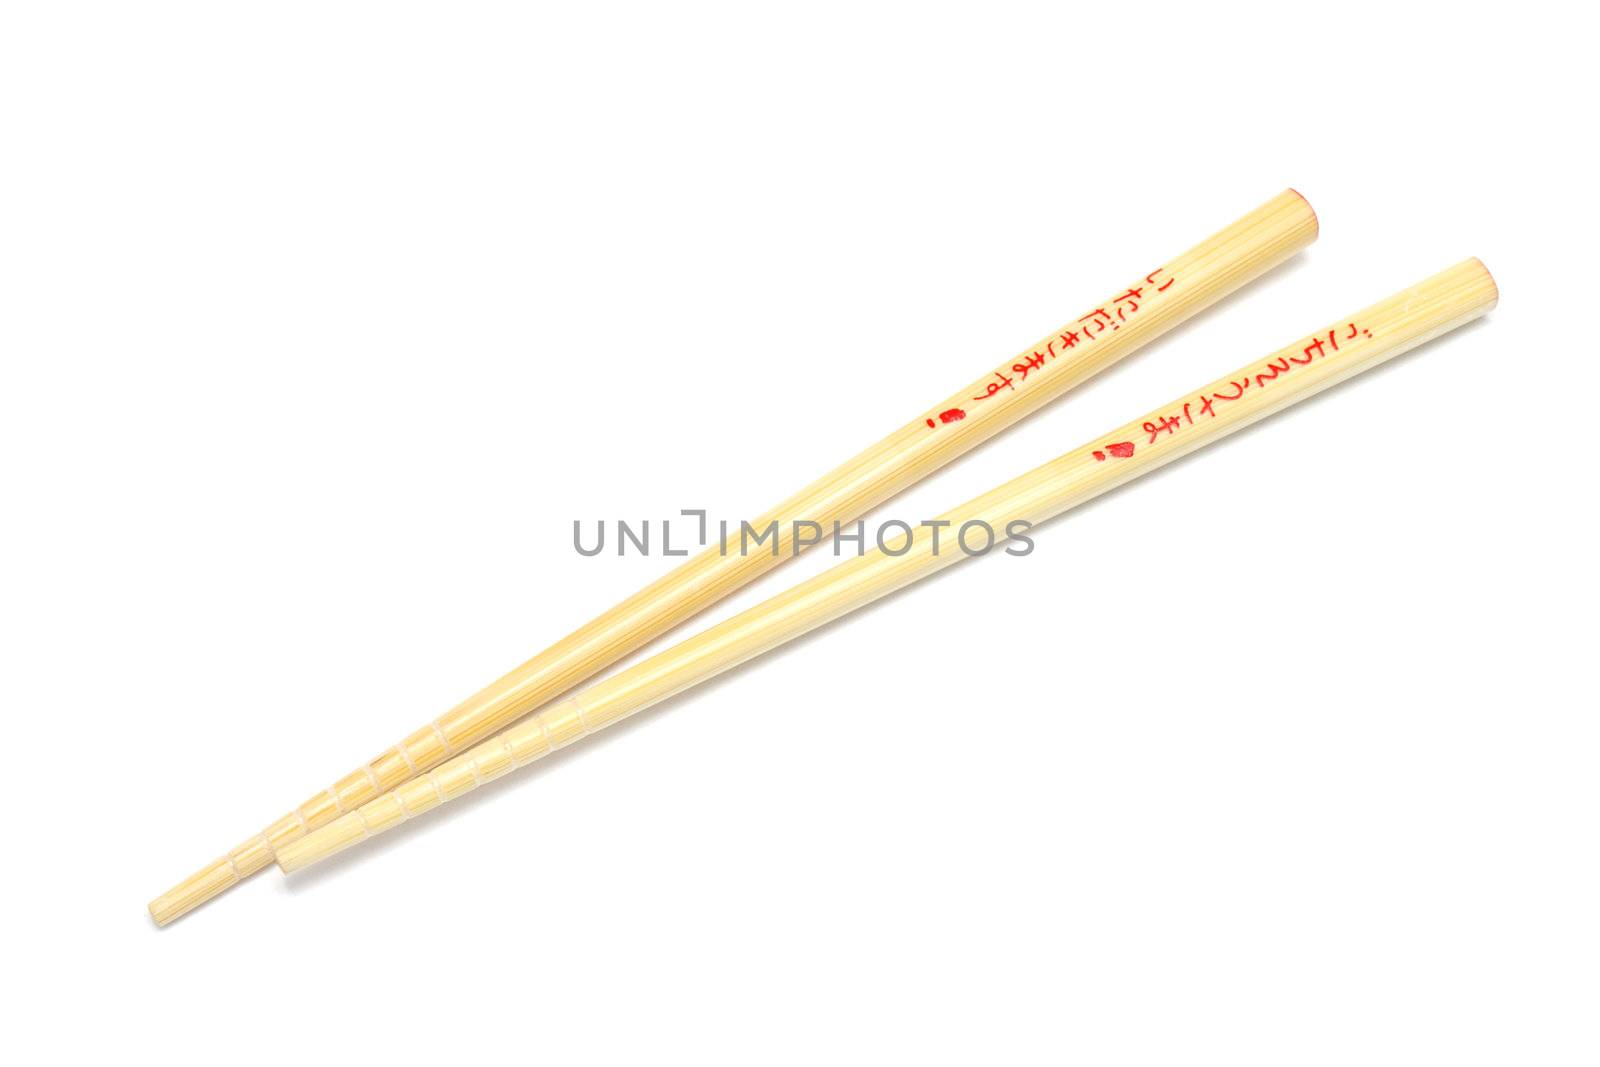 Pair of wooden chopsticks isolated on white by pulen